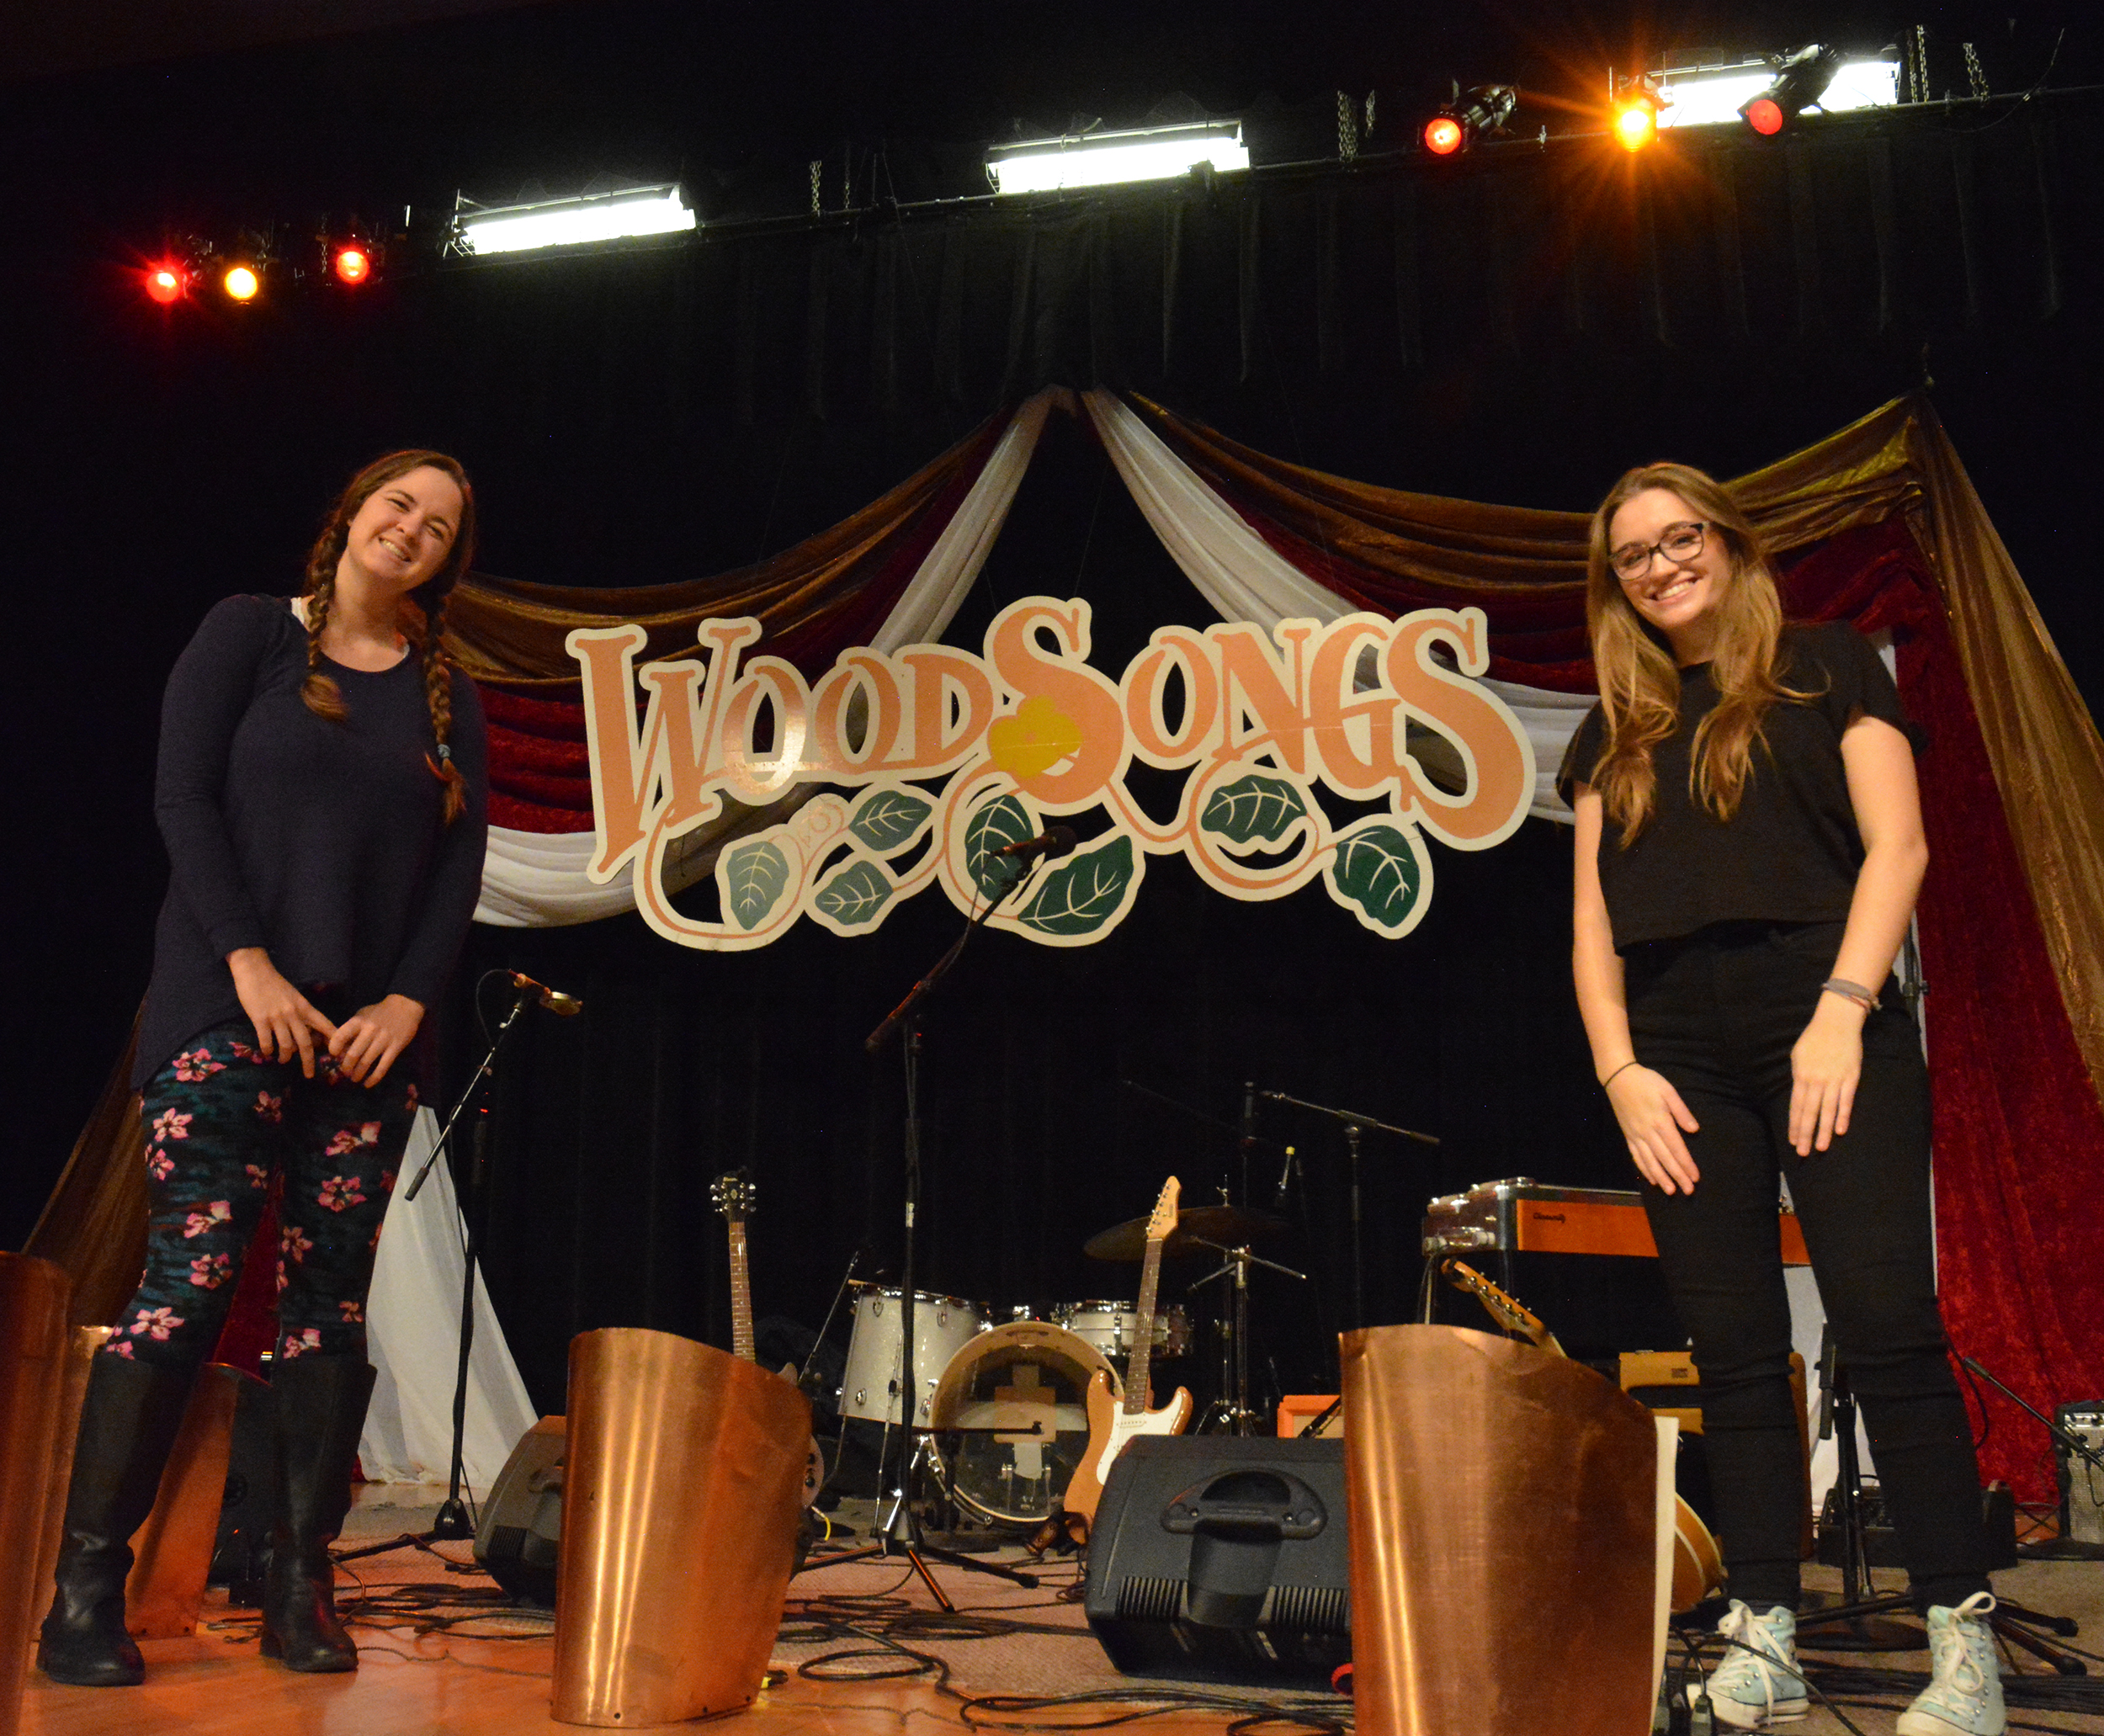 Transy students on WoodSongs stage